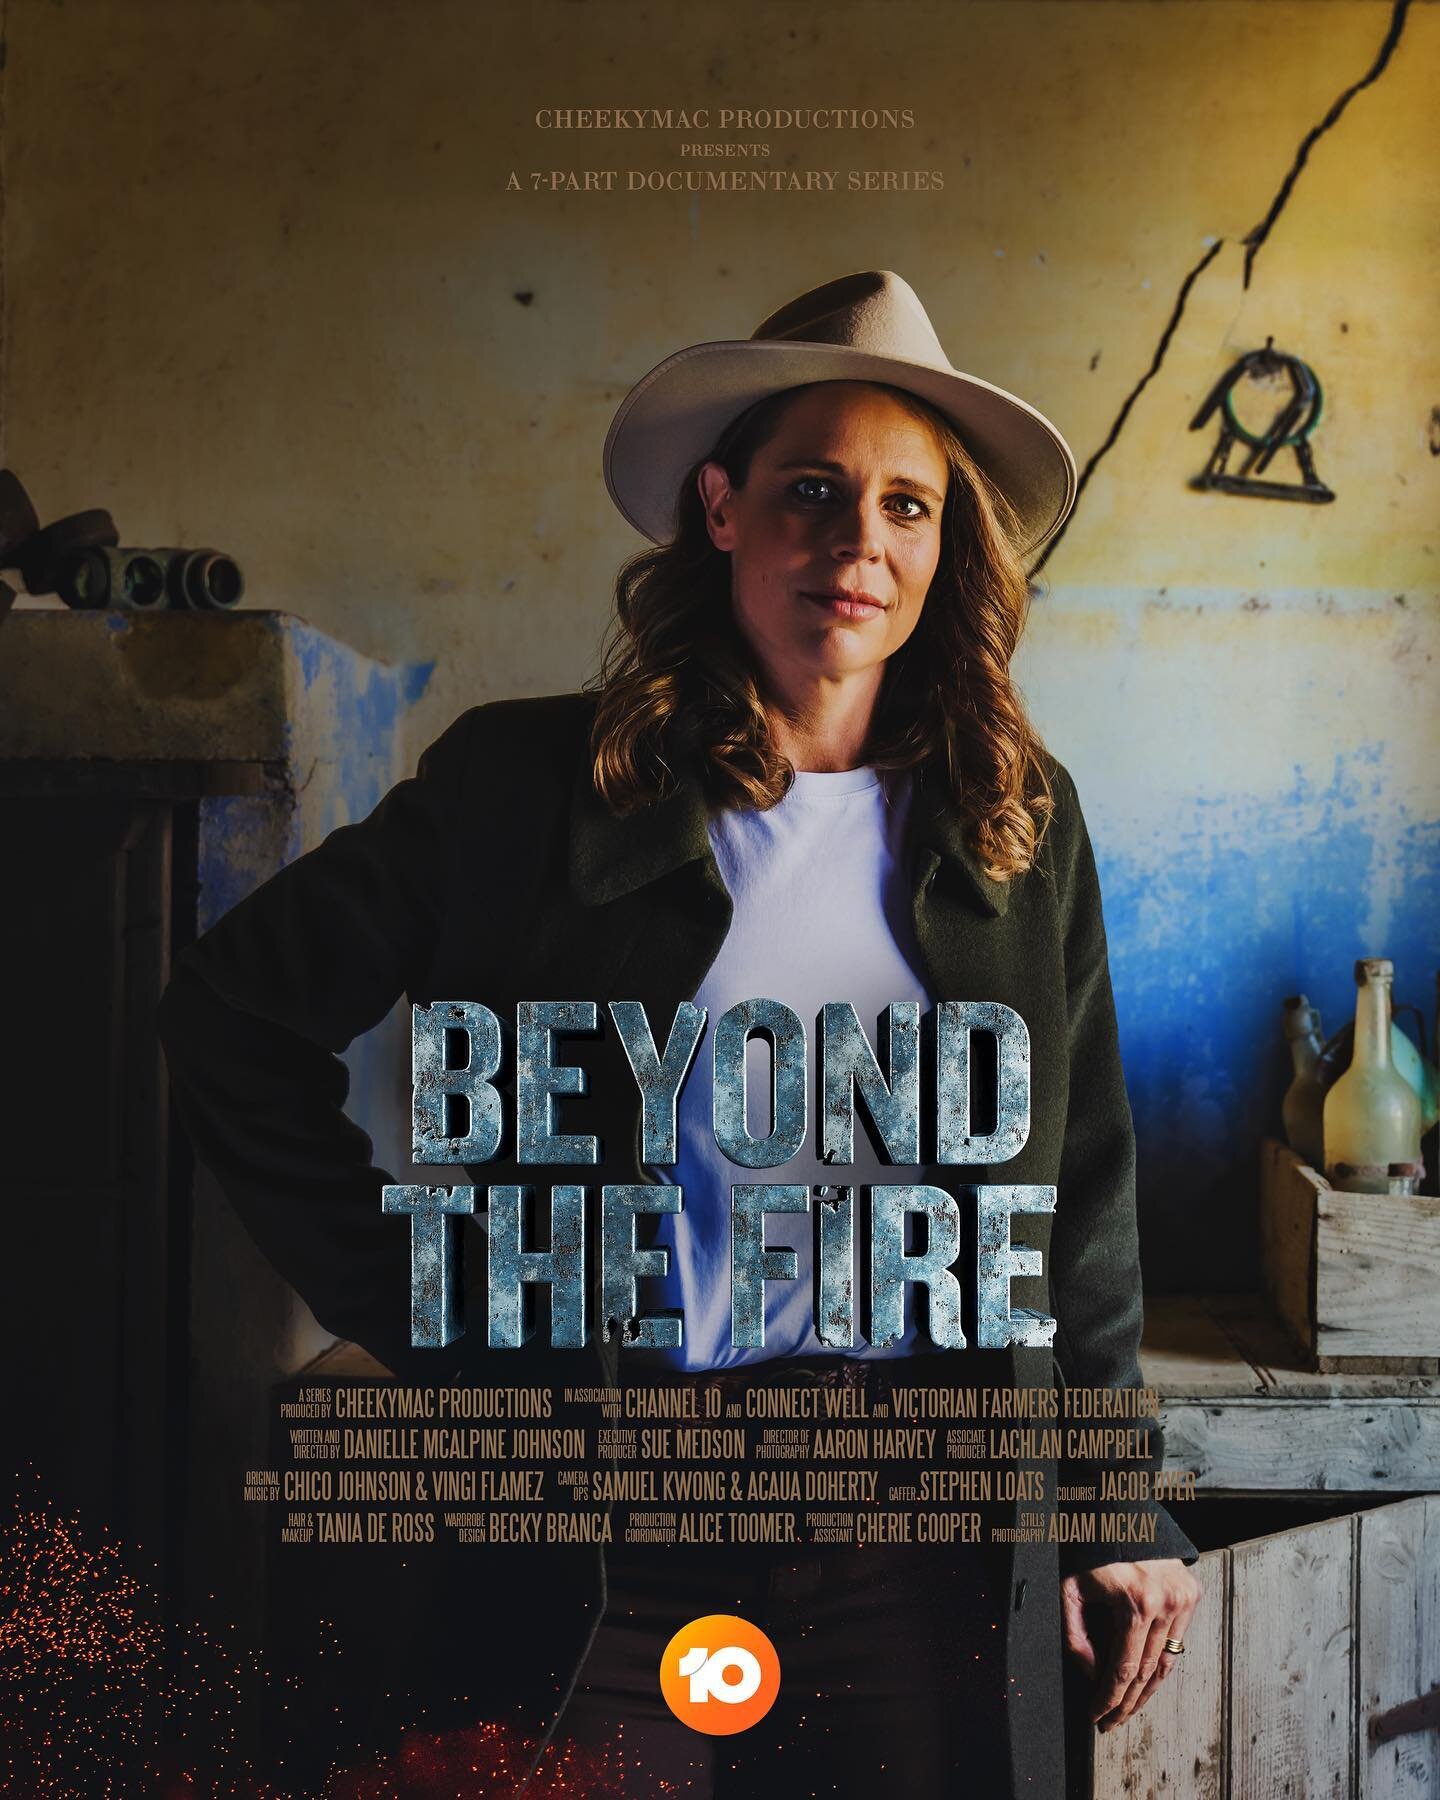 EP 7 - &ldquo;MILKING KINDNESS&rdquo; is the last episode in the @beyondthefire.tv series! Watch it on @10playau and wait for the bonus music vid at the end from @chicojohnsonmusic!

.
.
.
#blacksummerbushfires #documentaryseries #beyondthefire2020 #